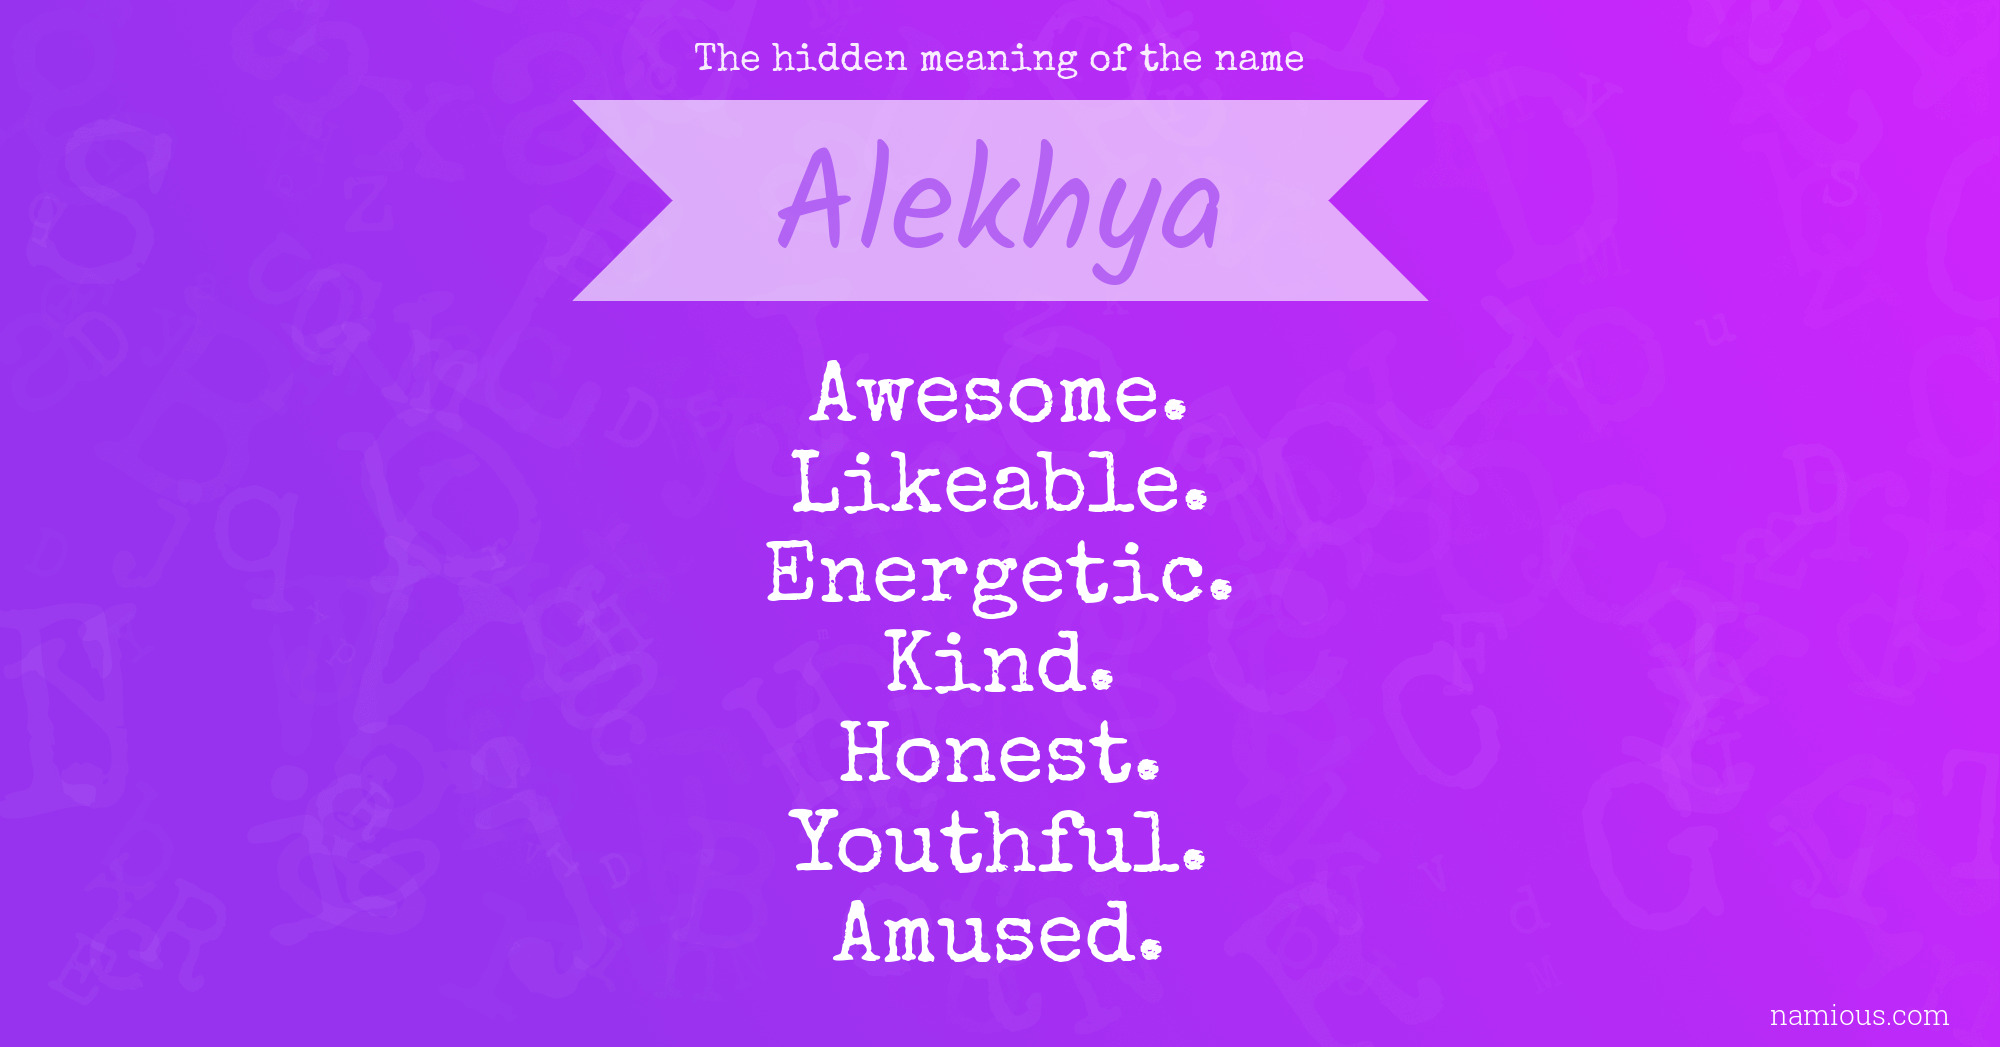 The hidden meaning of the name Alekhya